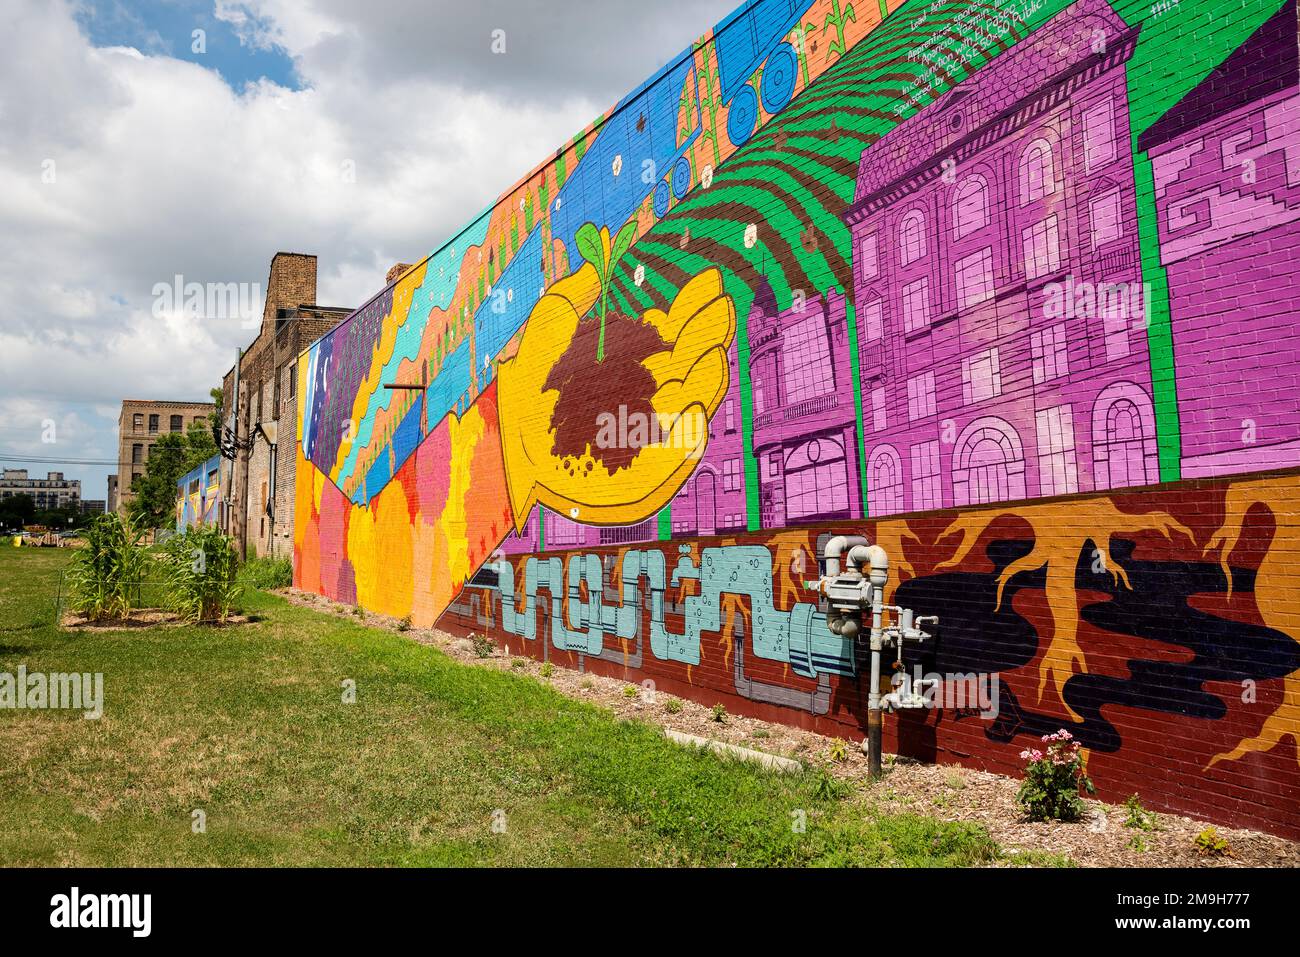 View of colorful mural, Chicago, Illinois, USA Stock Photo